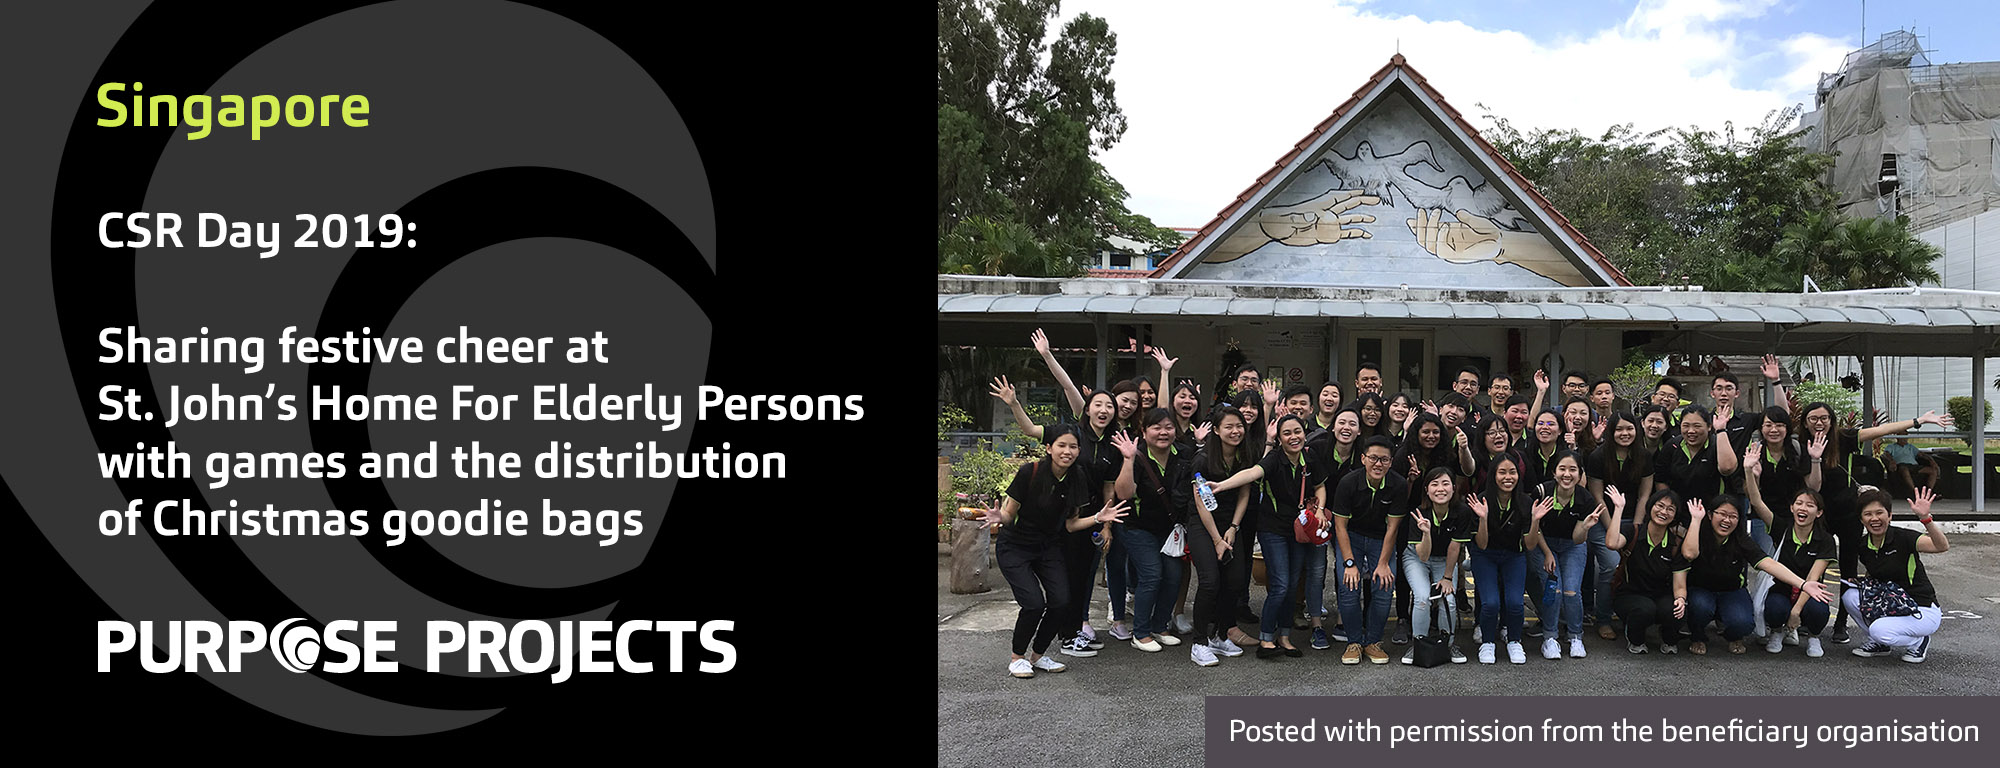 Baker Tilly Singapore CSR Day 2019_Purpose Projects_St. John's Home For Elderly Persons_Purpose Projects